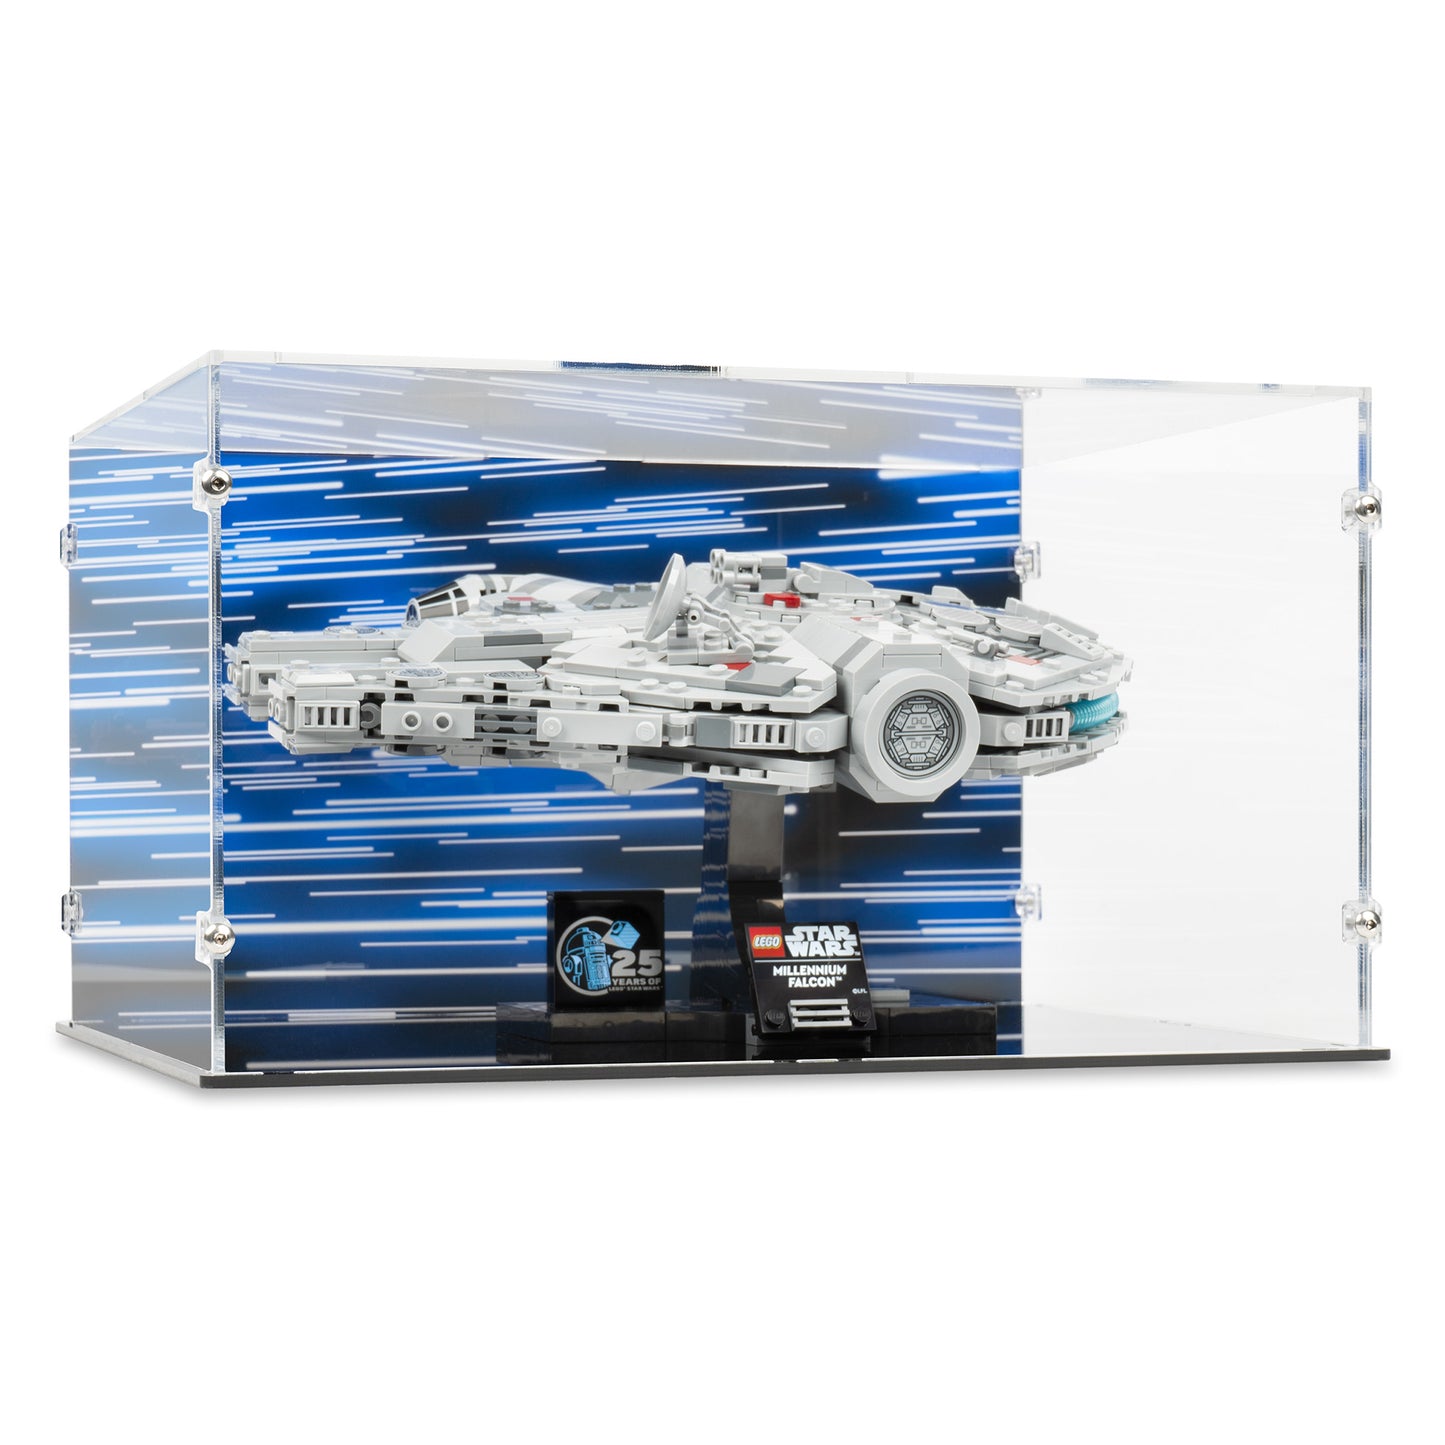 Angled view of LEGO 75375 Millennium Falcon Display Case with a UV printed background.